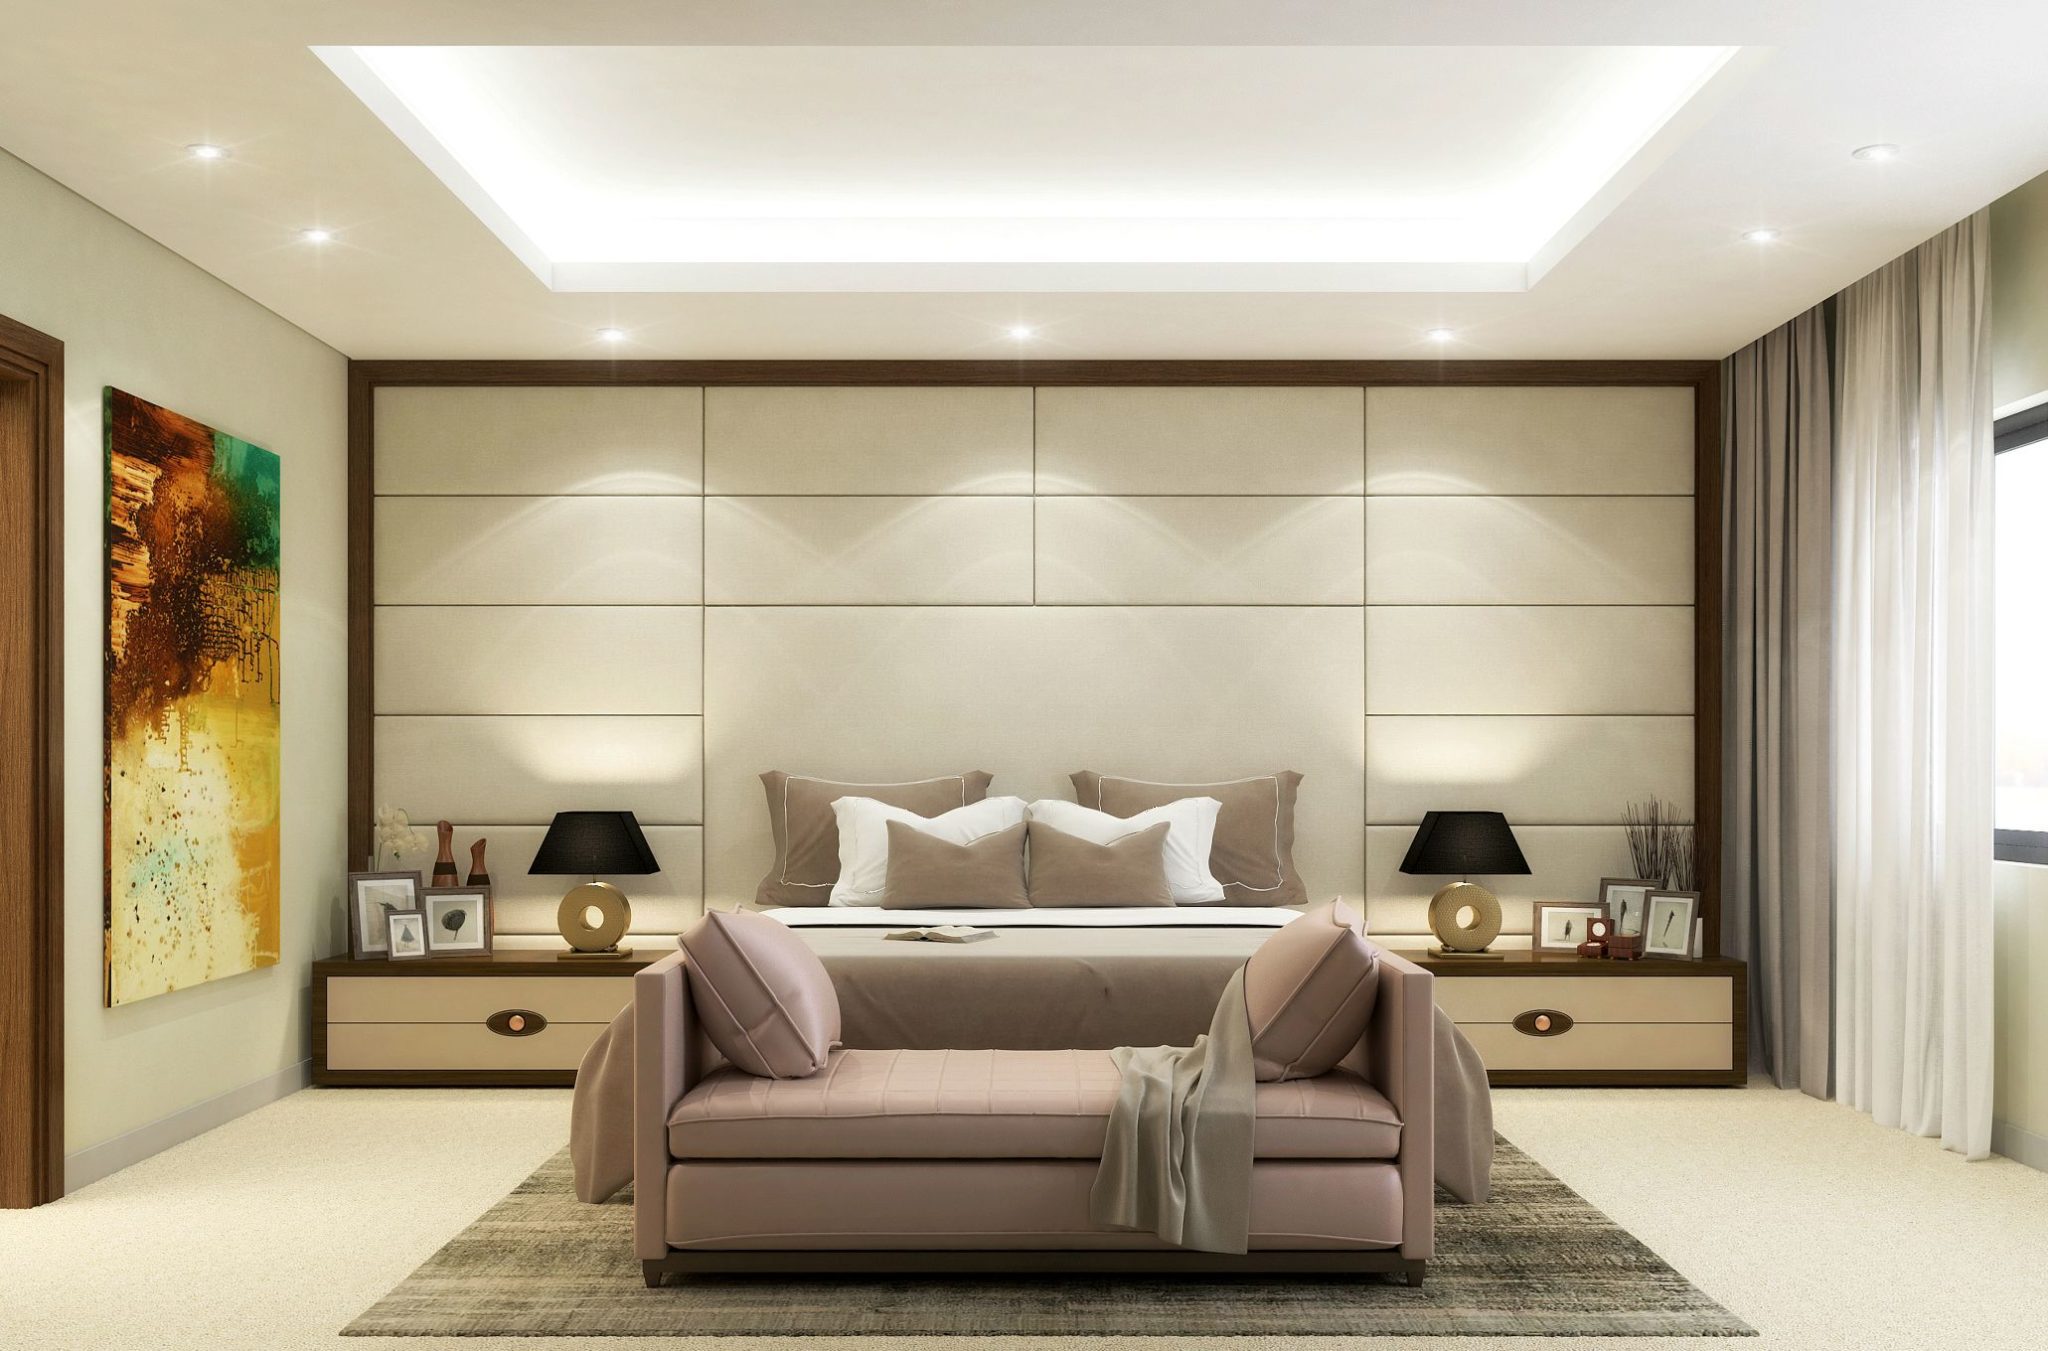 Interior Design Fit-Out Hospital in Dubai and KSA